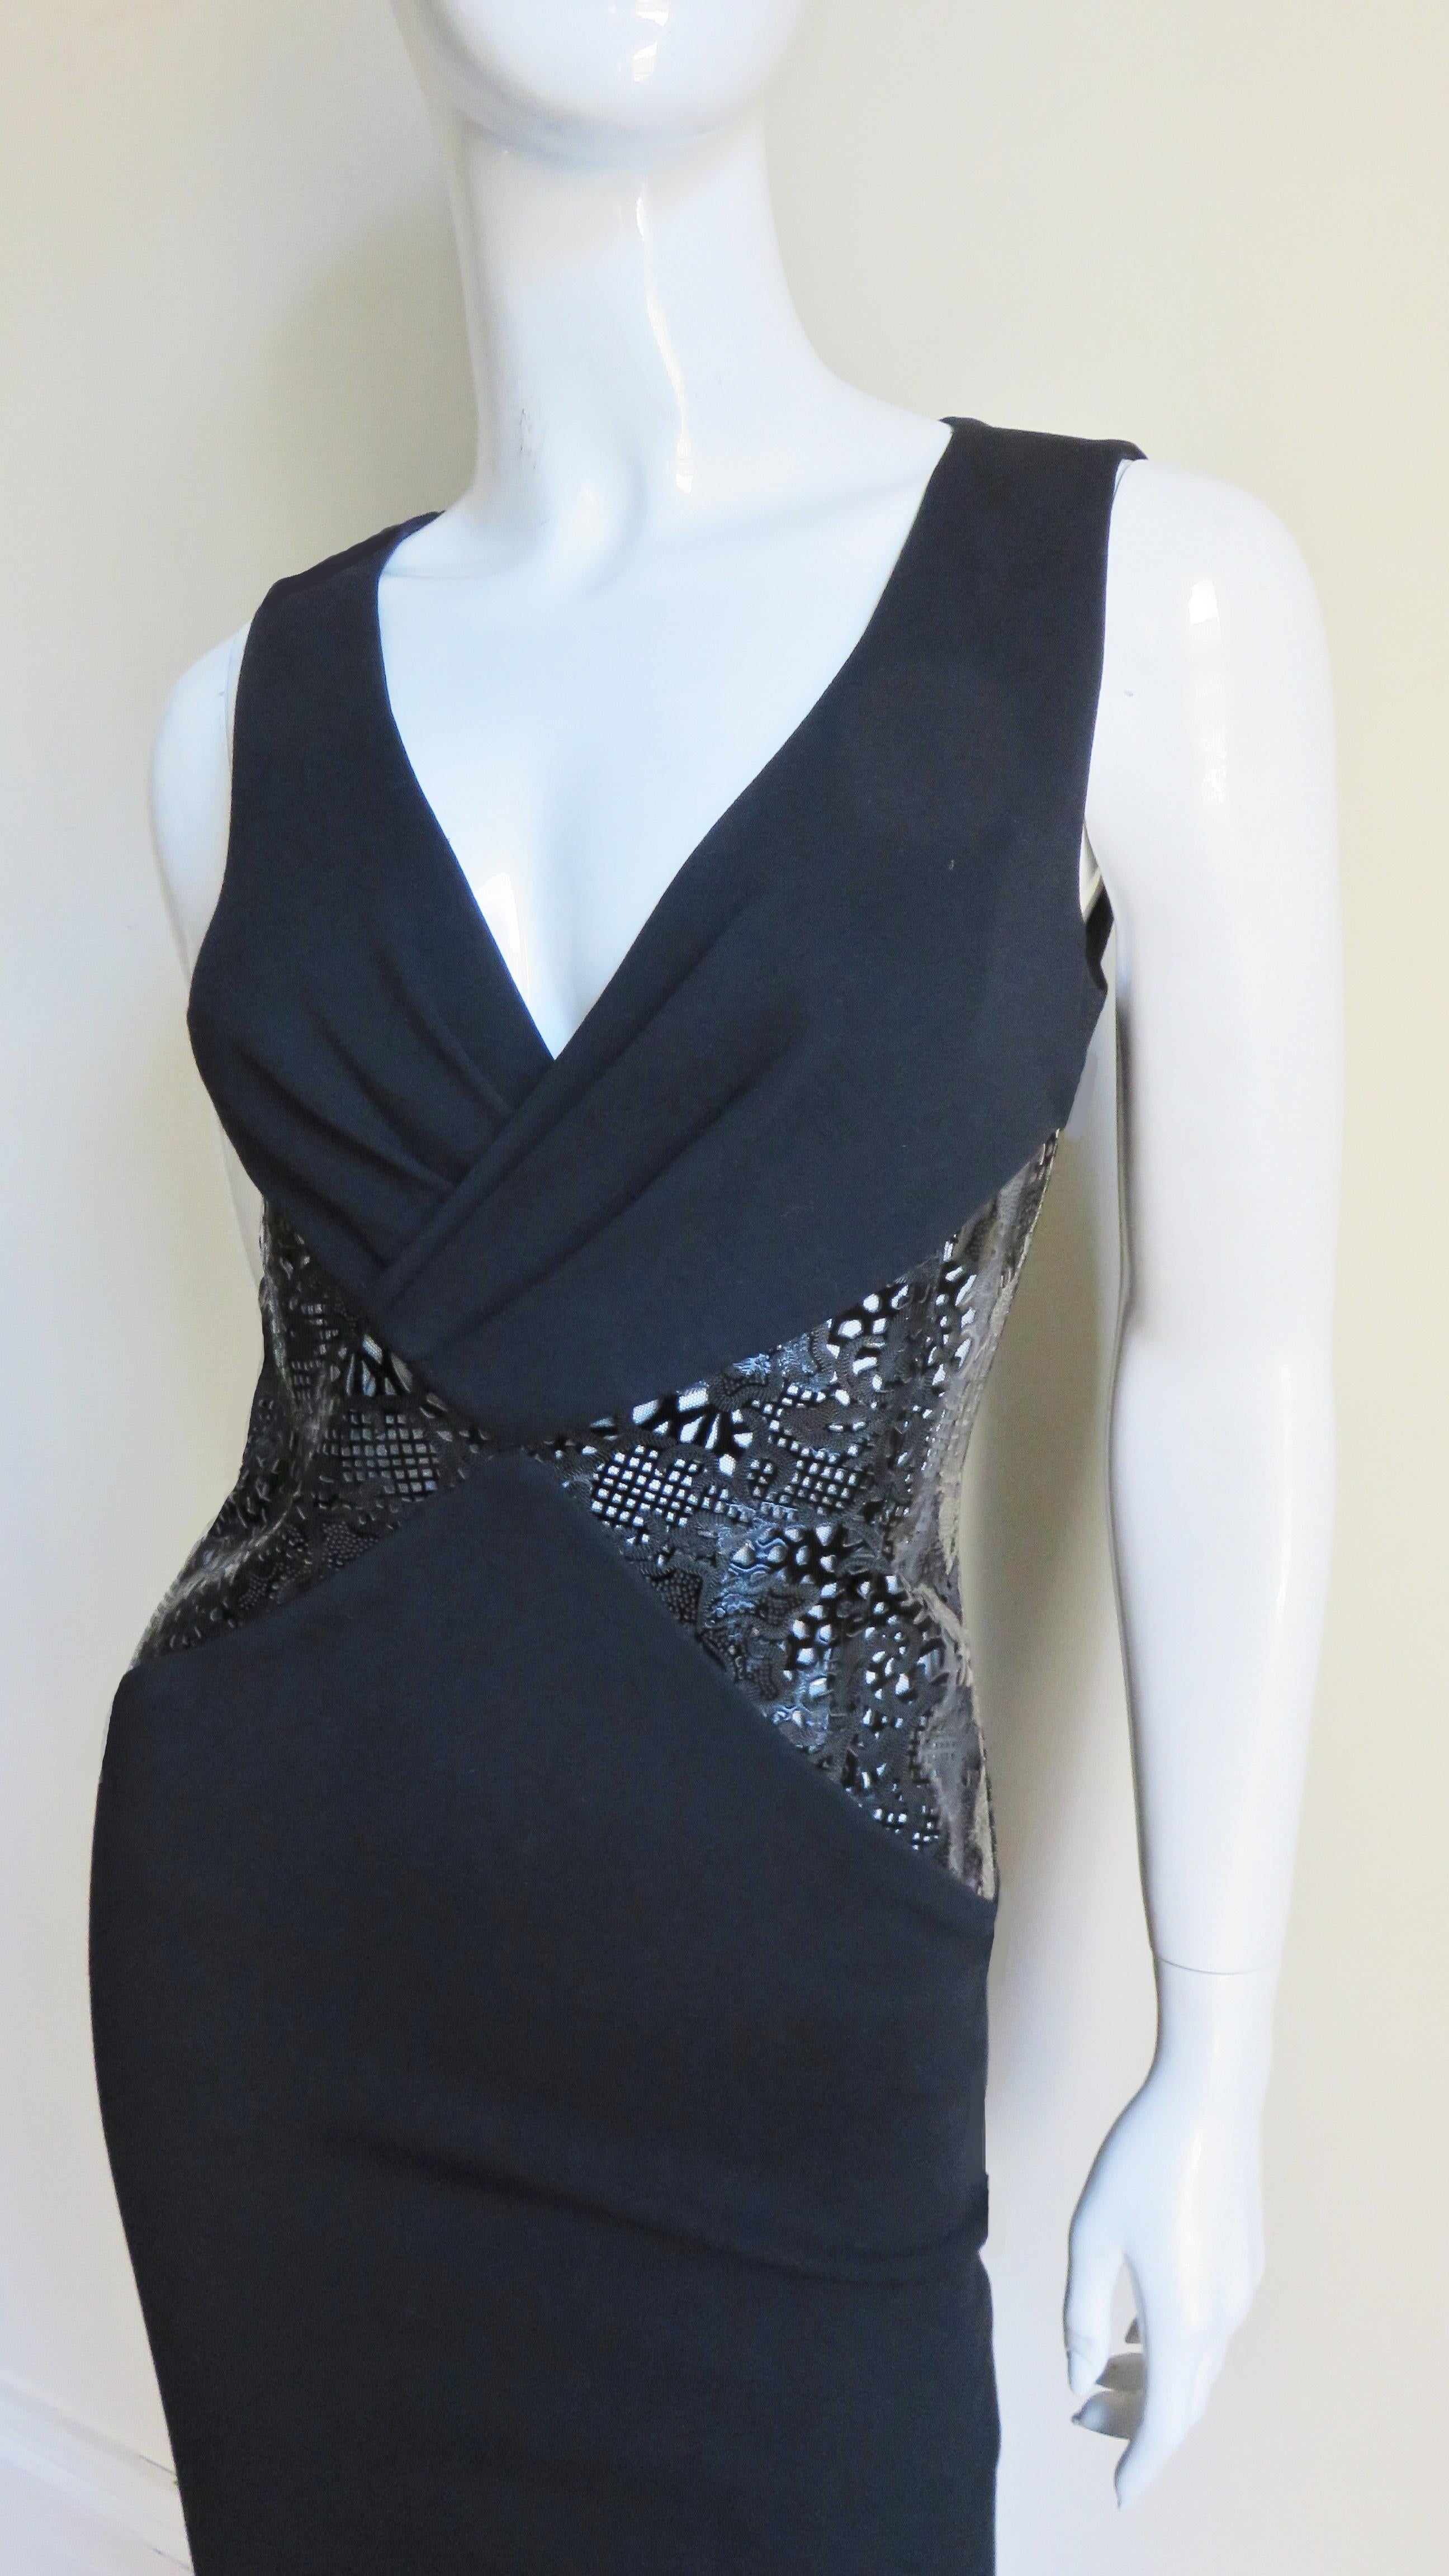 A stunning black jersey dress from Versace. It is sleeveless, fitted with a V front neckline and 2 triangular insets at the front and back waist of intricately laser cut black patent leather in a series of perforations in varying sizes and shapes.